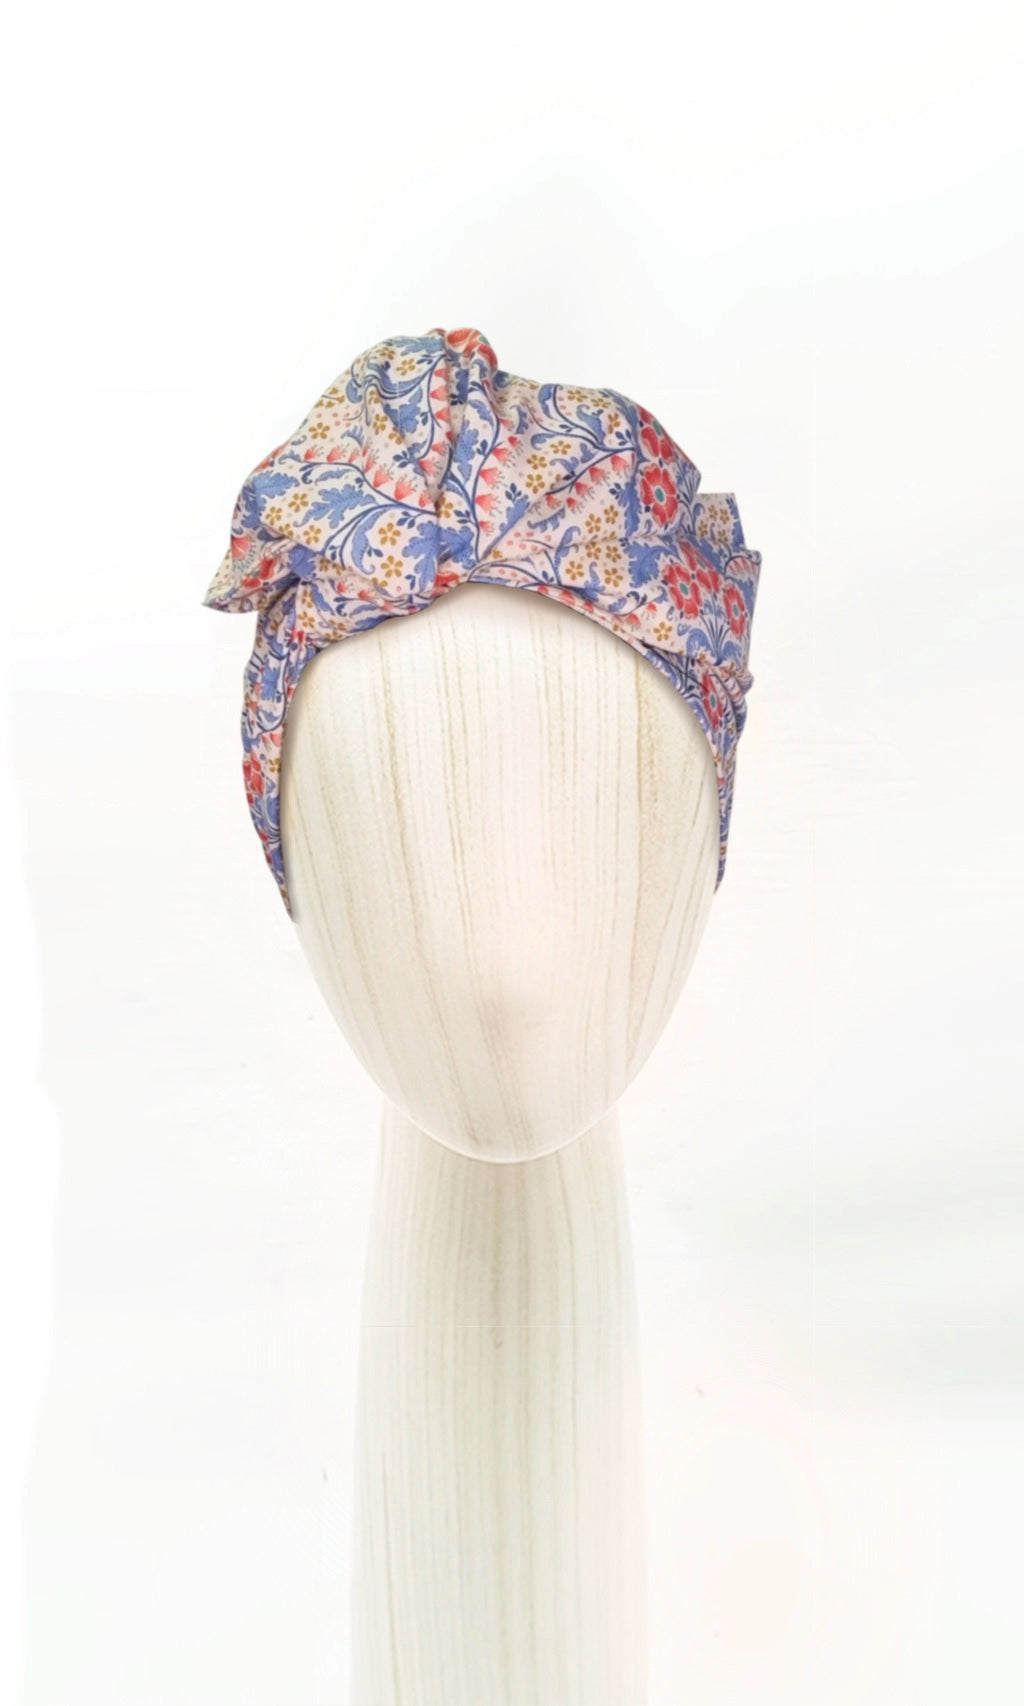 The Celine Martine wired head wrap in Elanora Blue displayed on a mannequin head styled in one of several hair scarf options